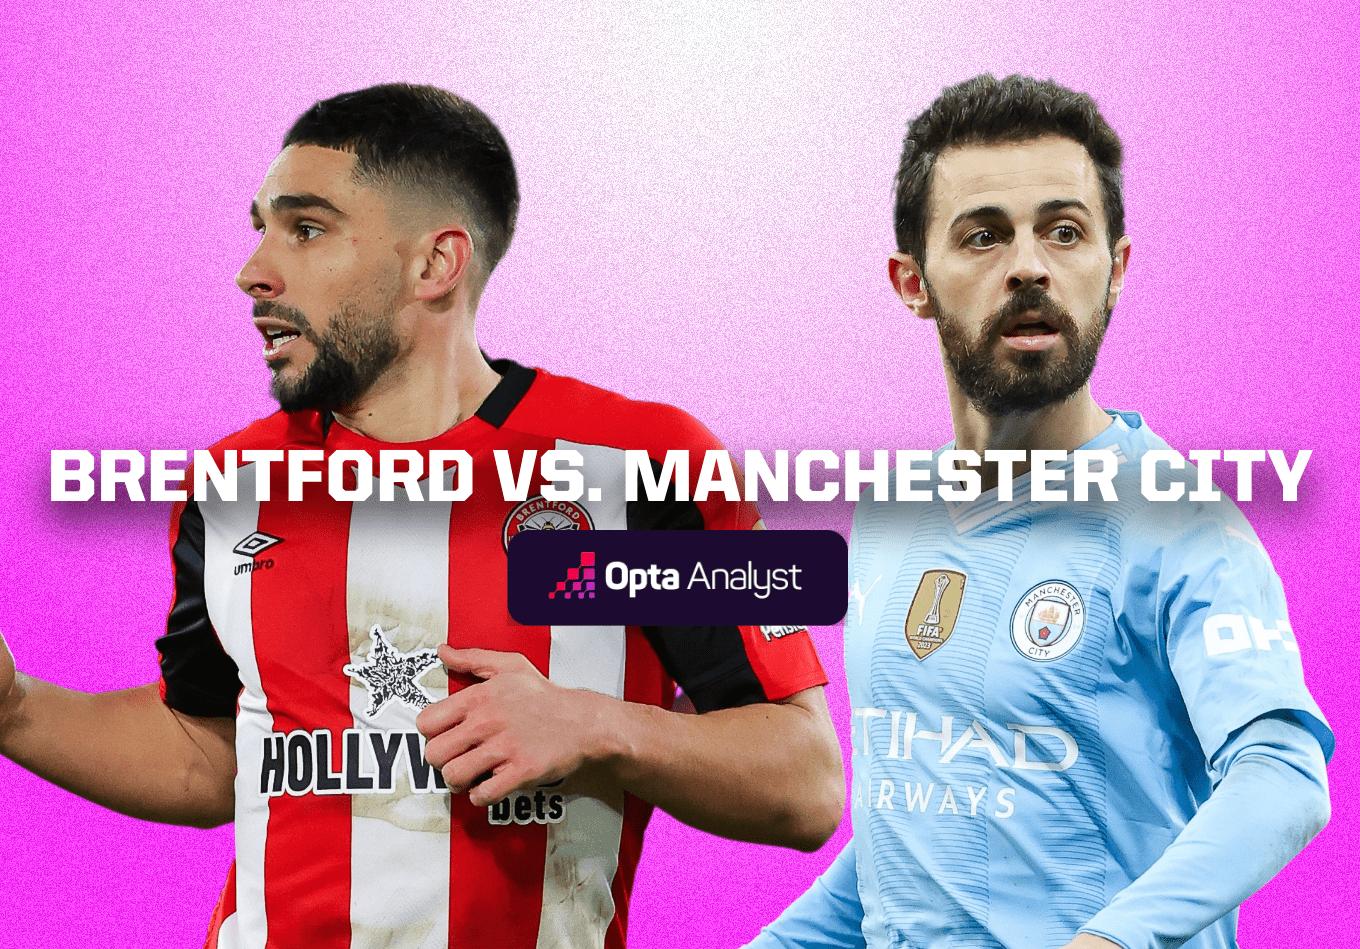 Brentford vs Manchester City: Prediction and Preview